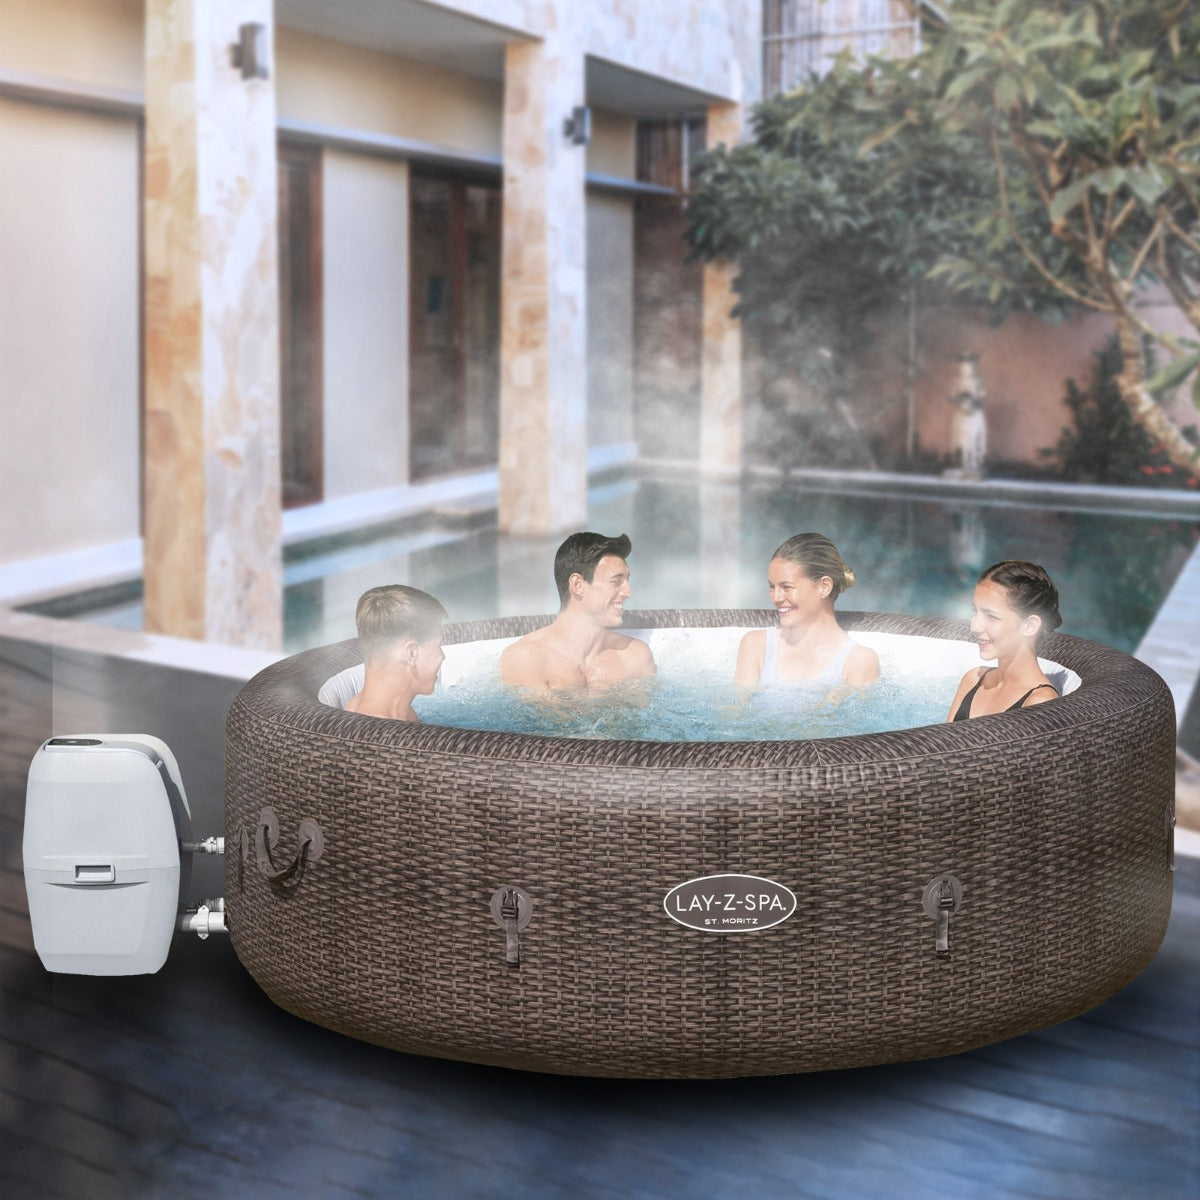 Gigantic! Outbax Lay Z Hot Moritz St. Tub Spa Bestway Heated |